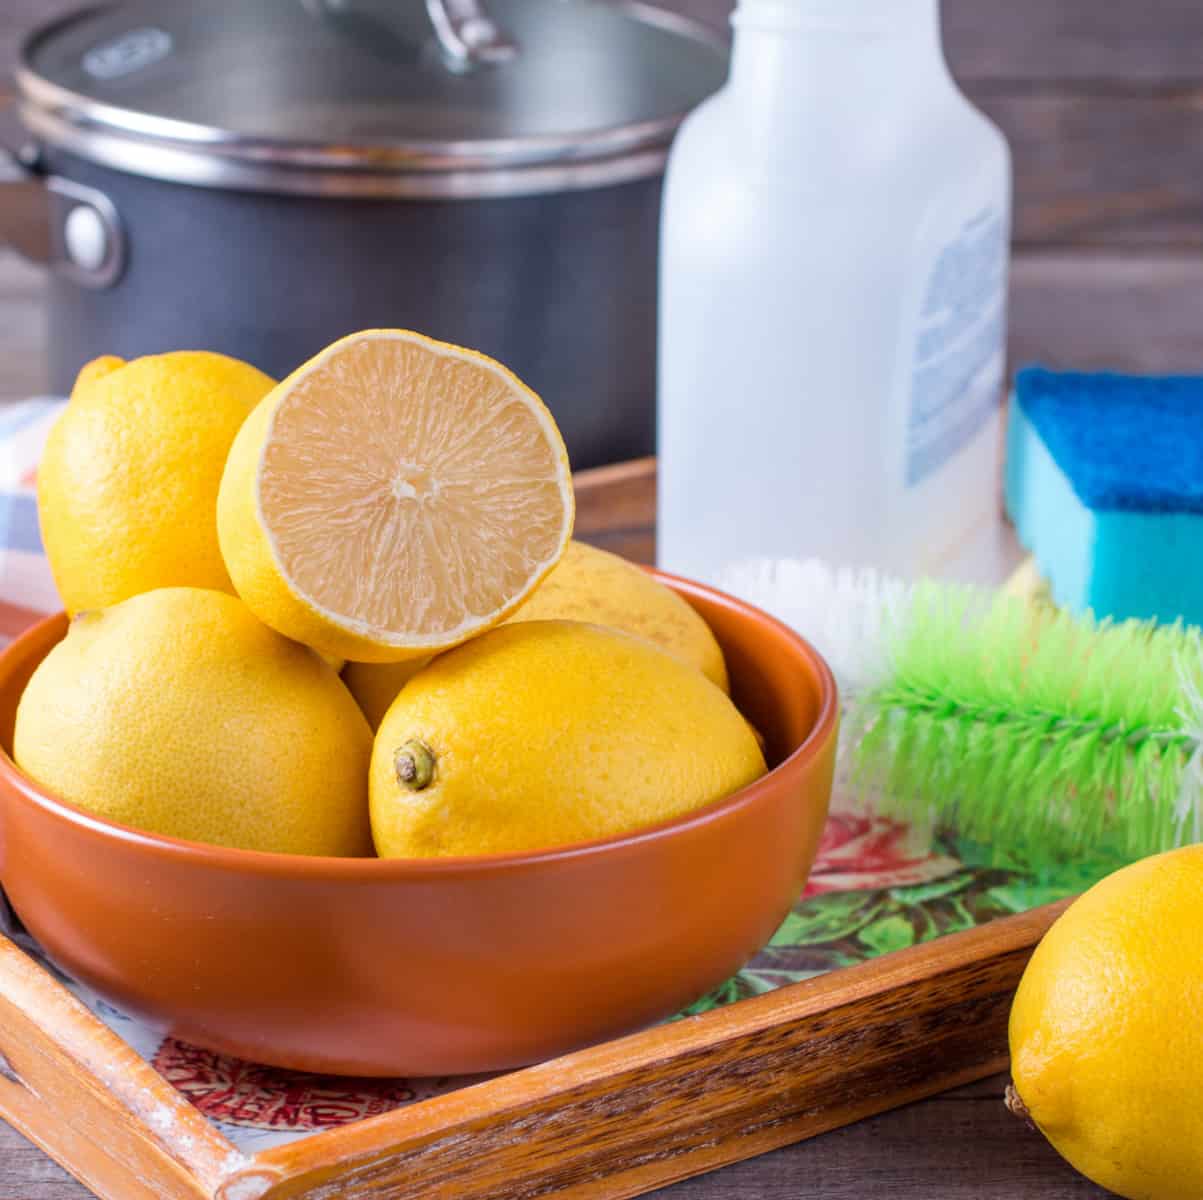 10 Amazing Uses for Lemons in Your Home